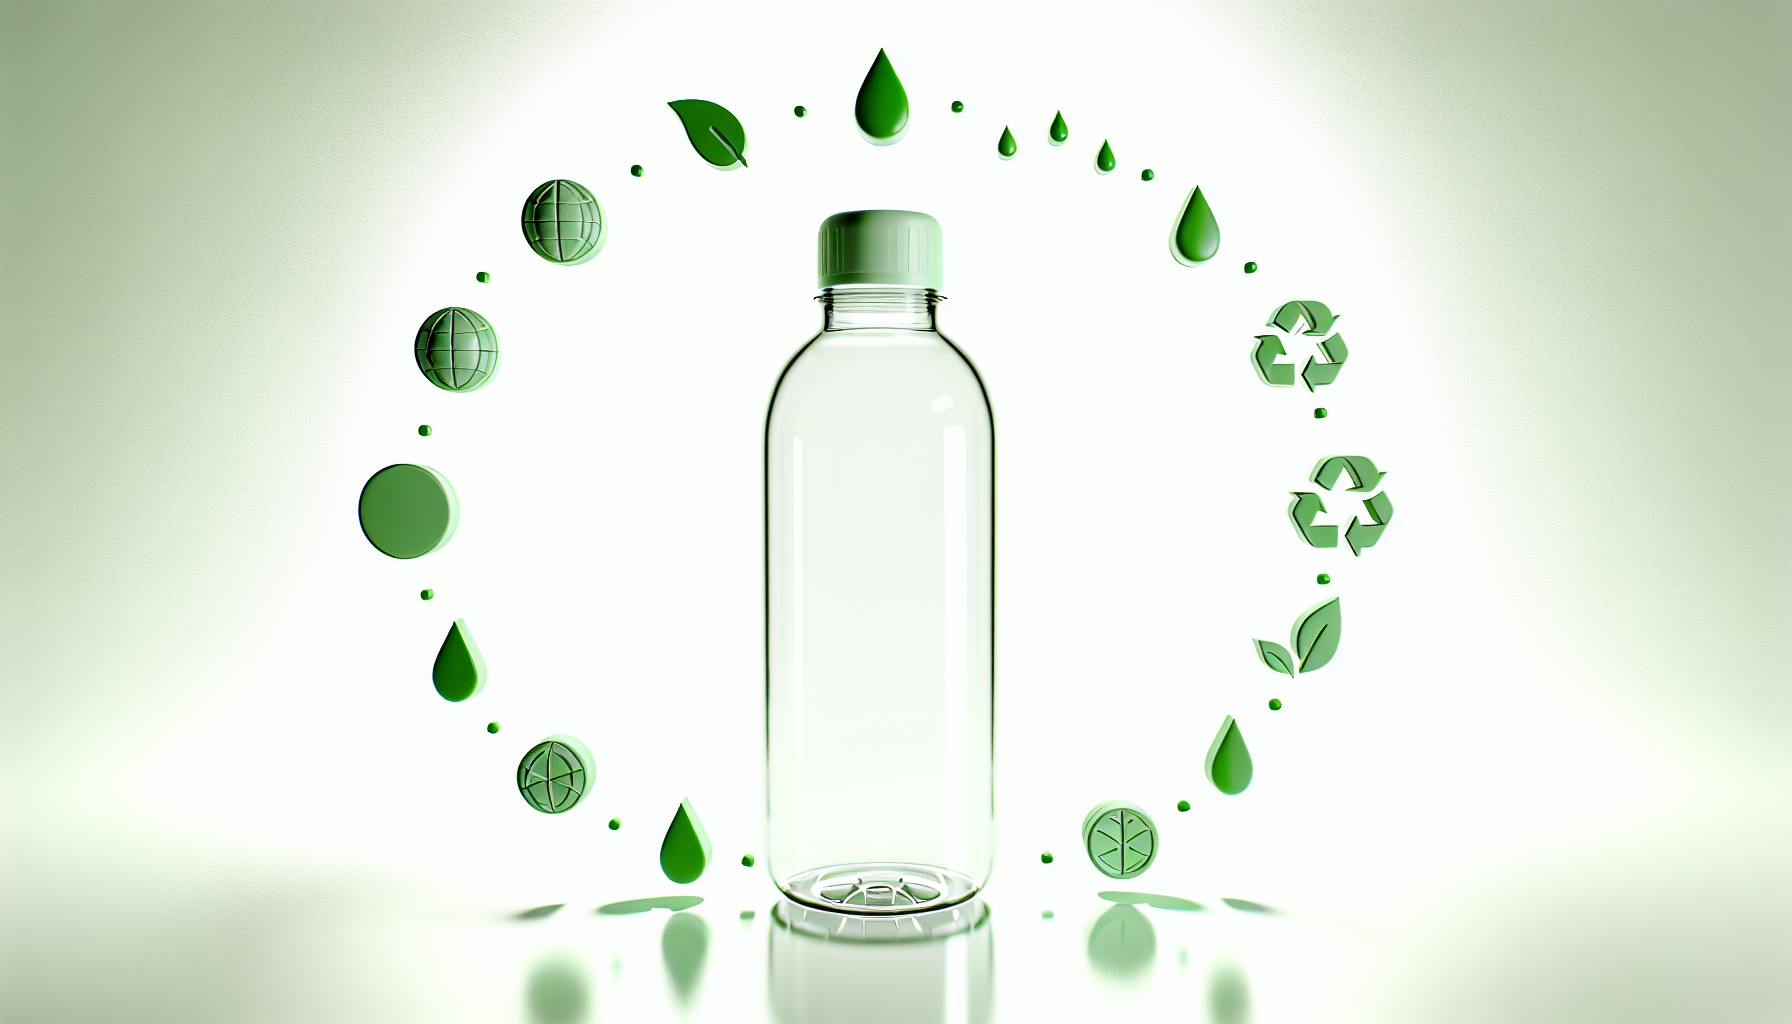 Toxic Free Waterbottle and Microplastics Reduction